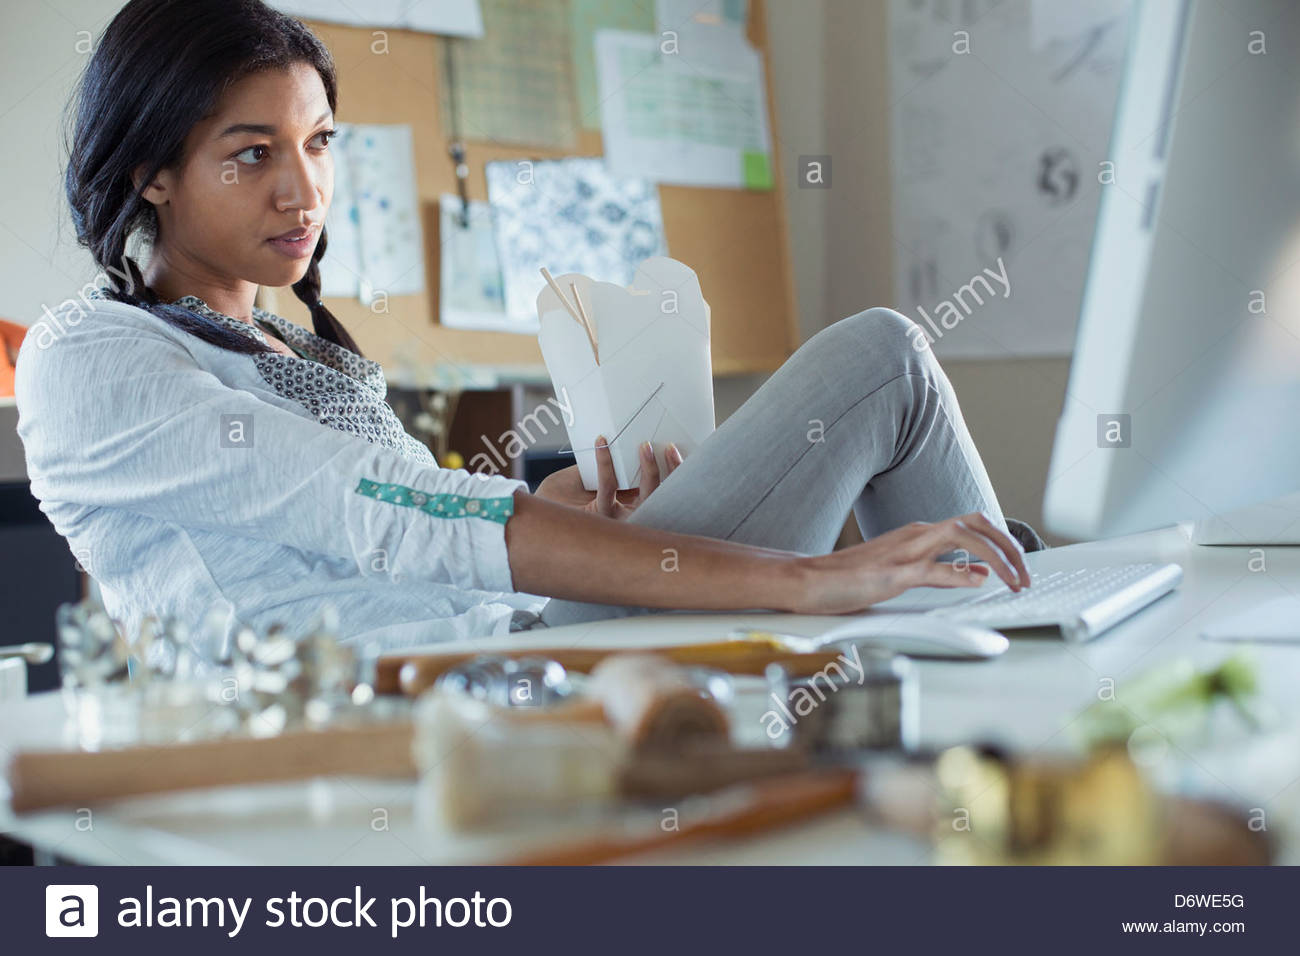 Female jewelry artist with take out food using computer at work Stock Photo